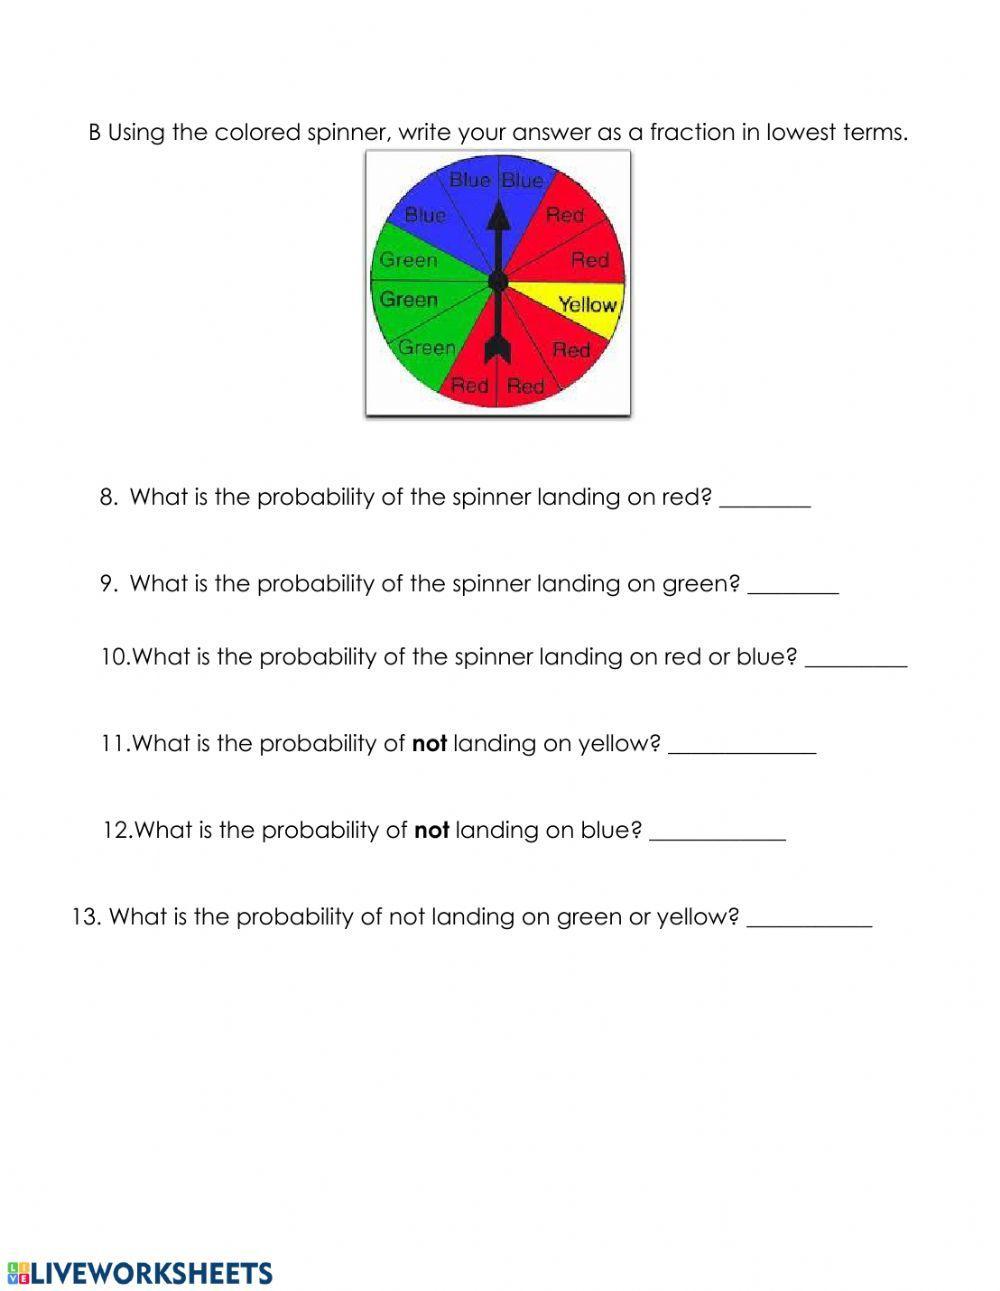 Probability as a Fraction